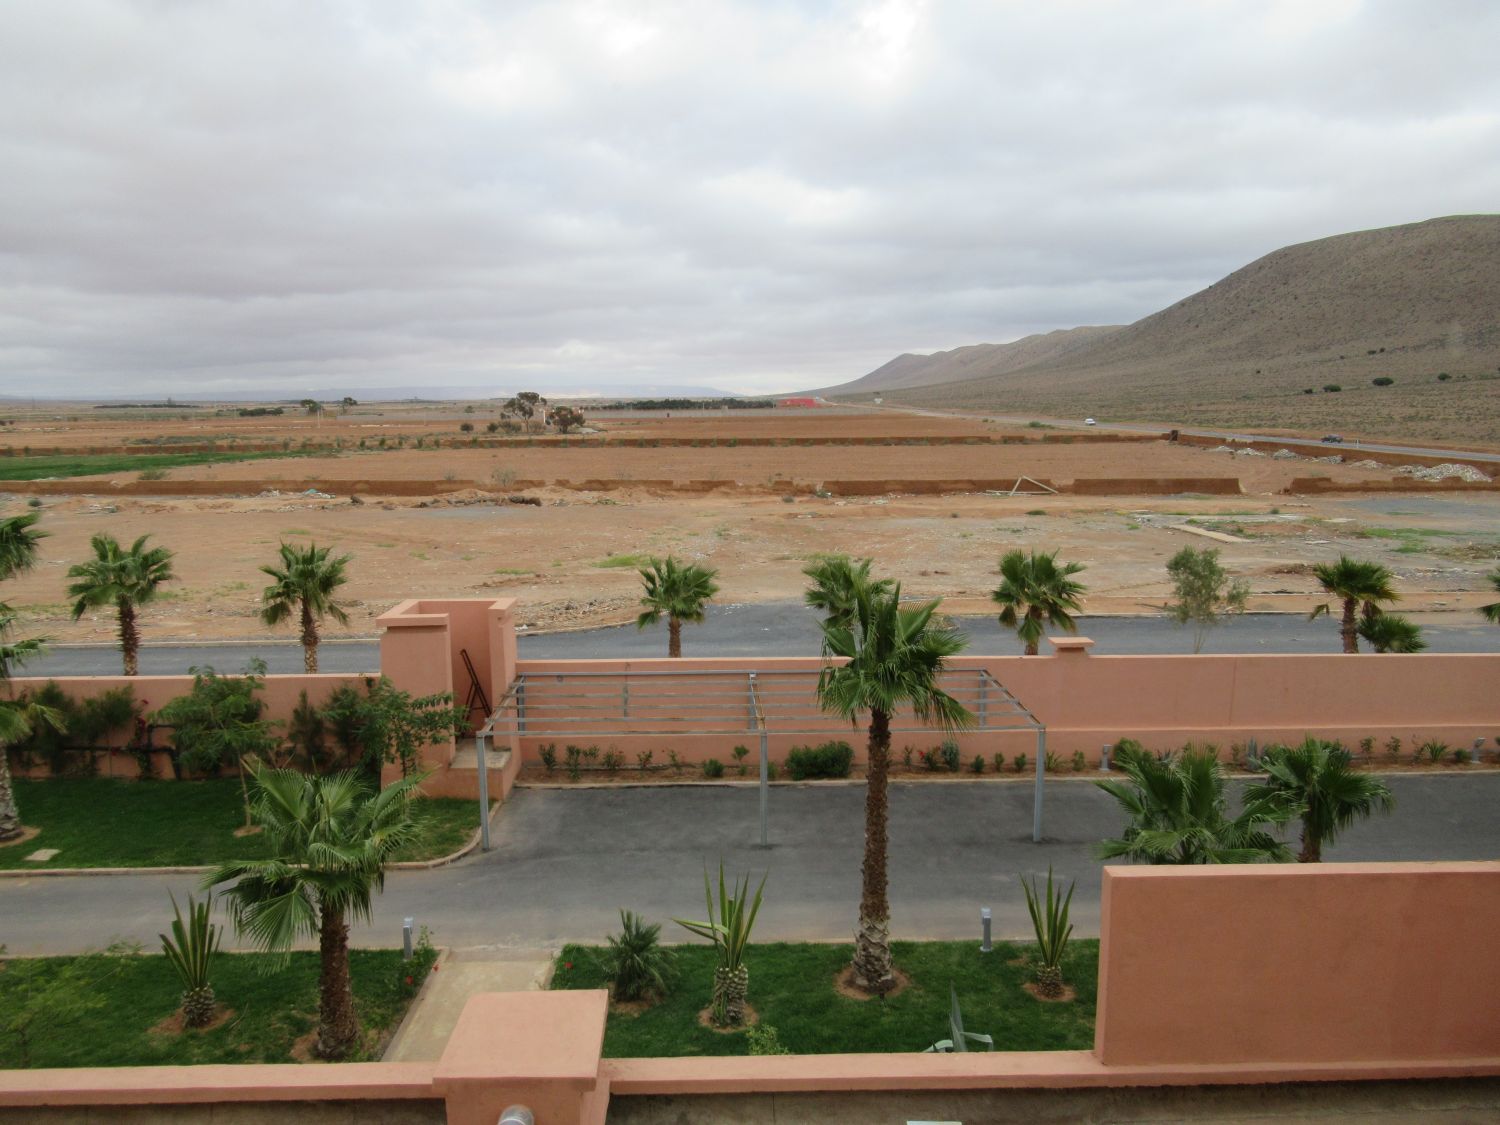 View toward desert and mountain range from east side.